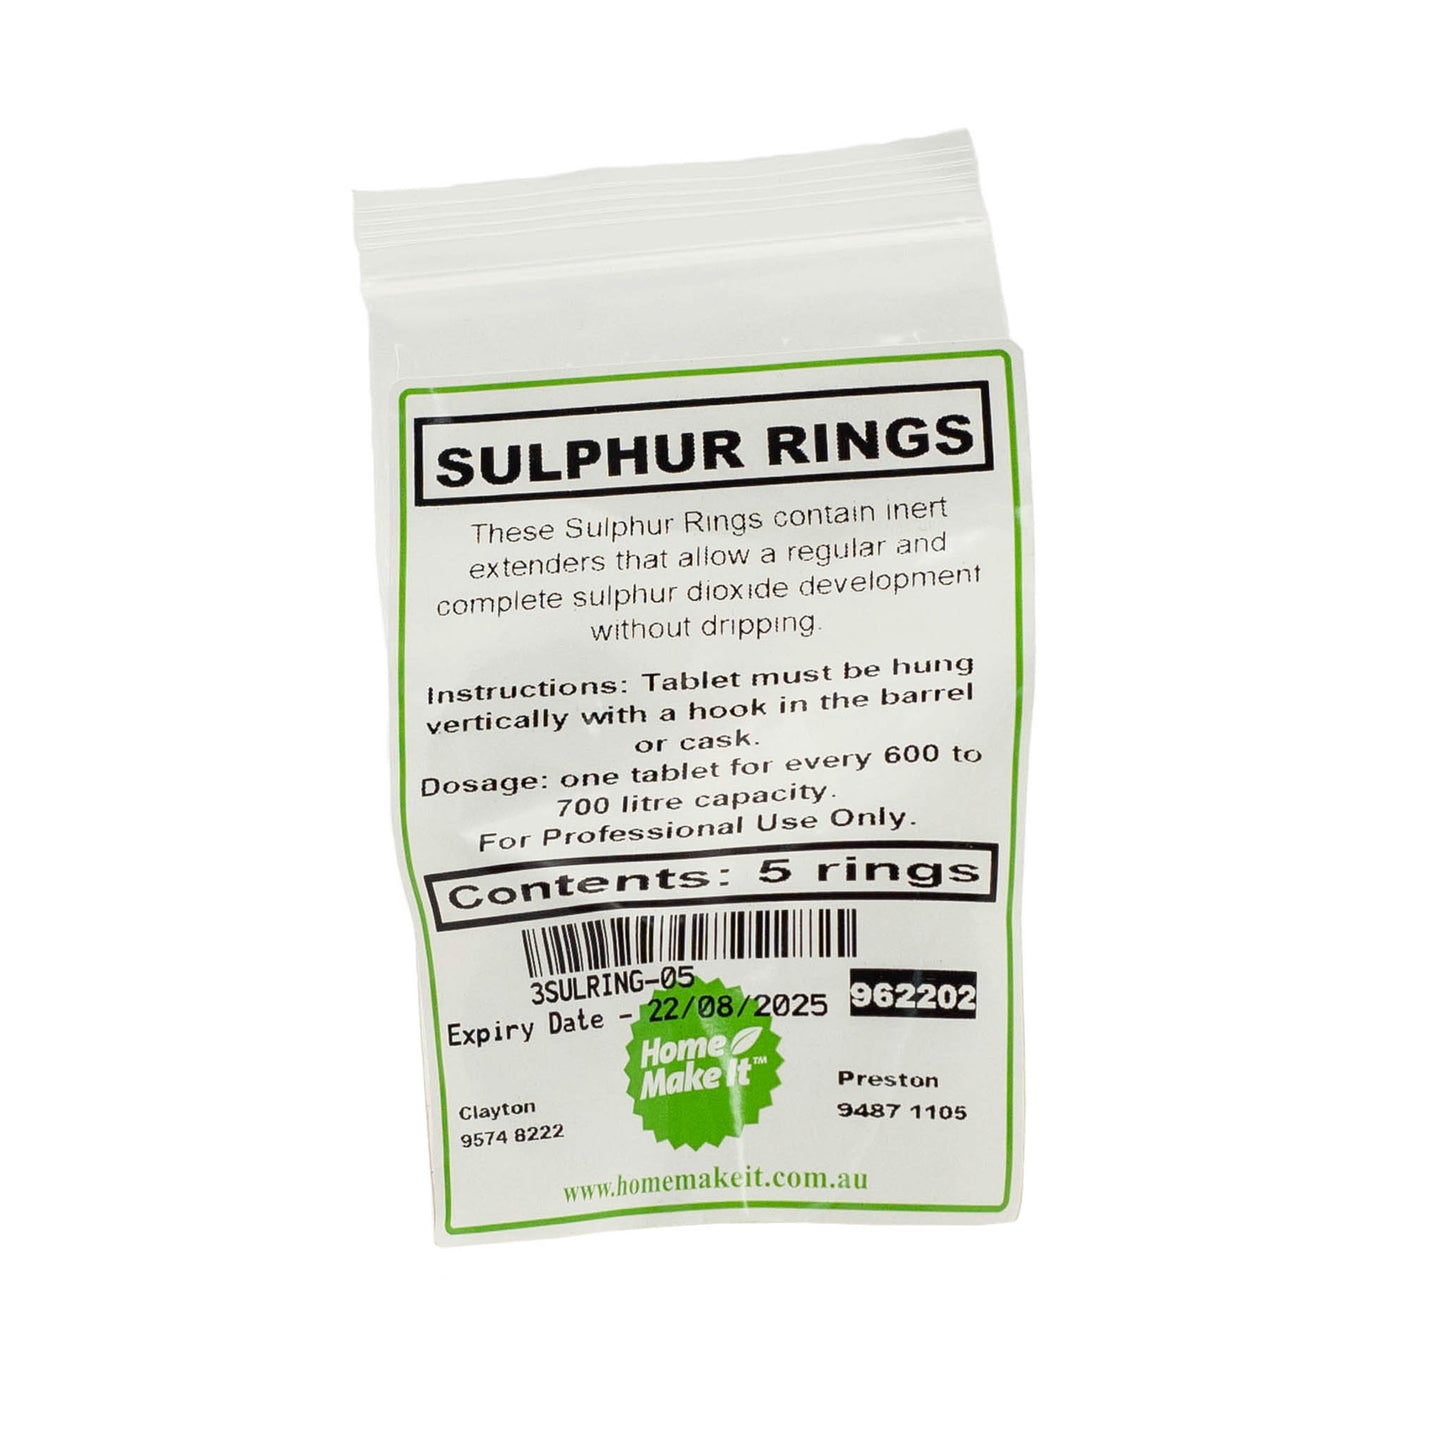 These sulphur rings contain inert extenders that allow a regular and complete sulphur dioxide development without dripping